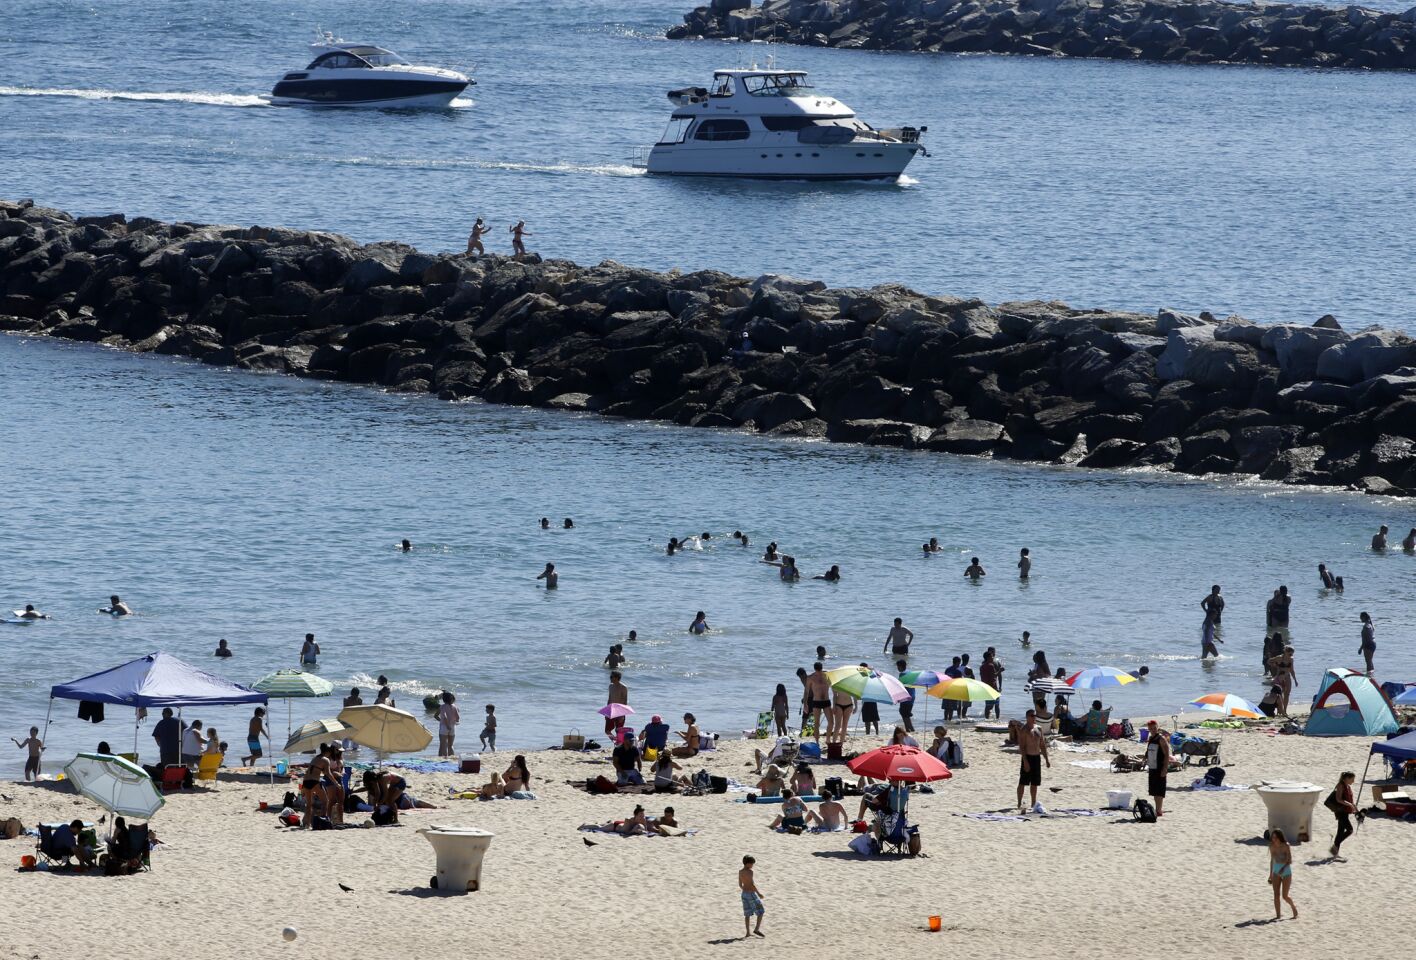 With temperatures soaring into the 90's inland, people flocked to Corona del Mar State Beach to beat the heat.